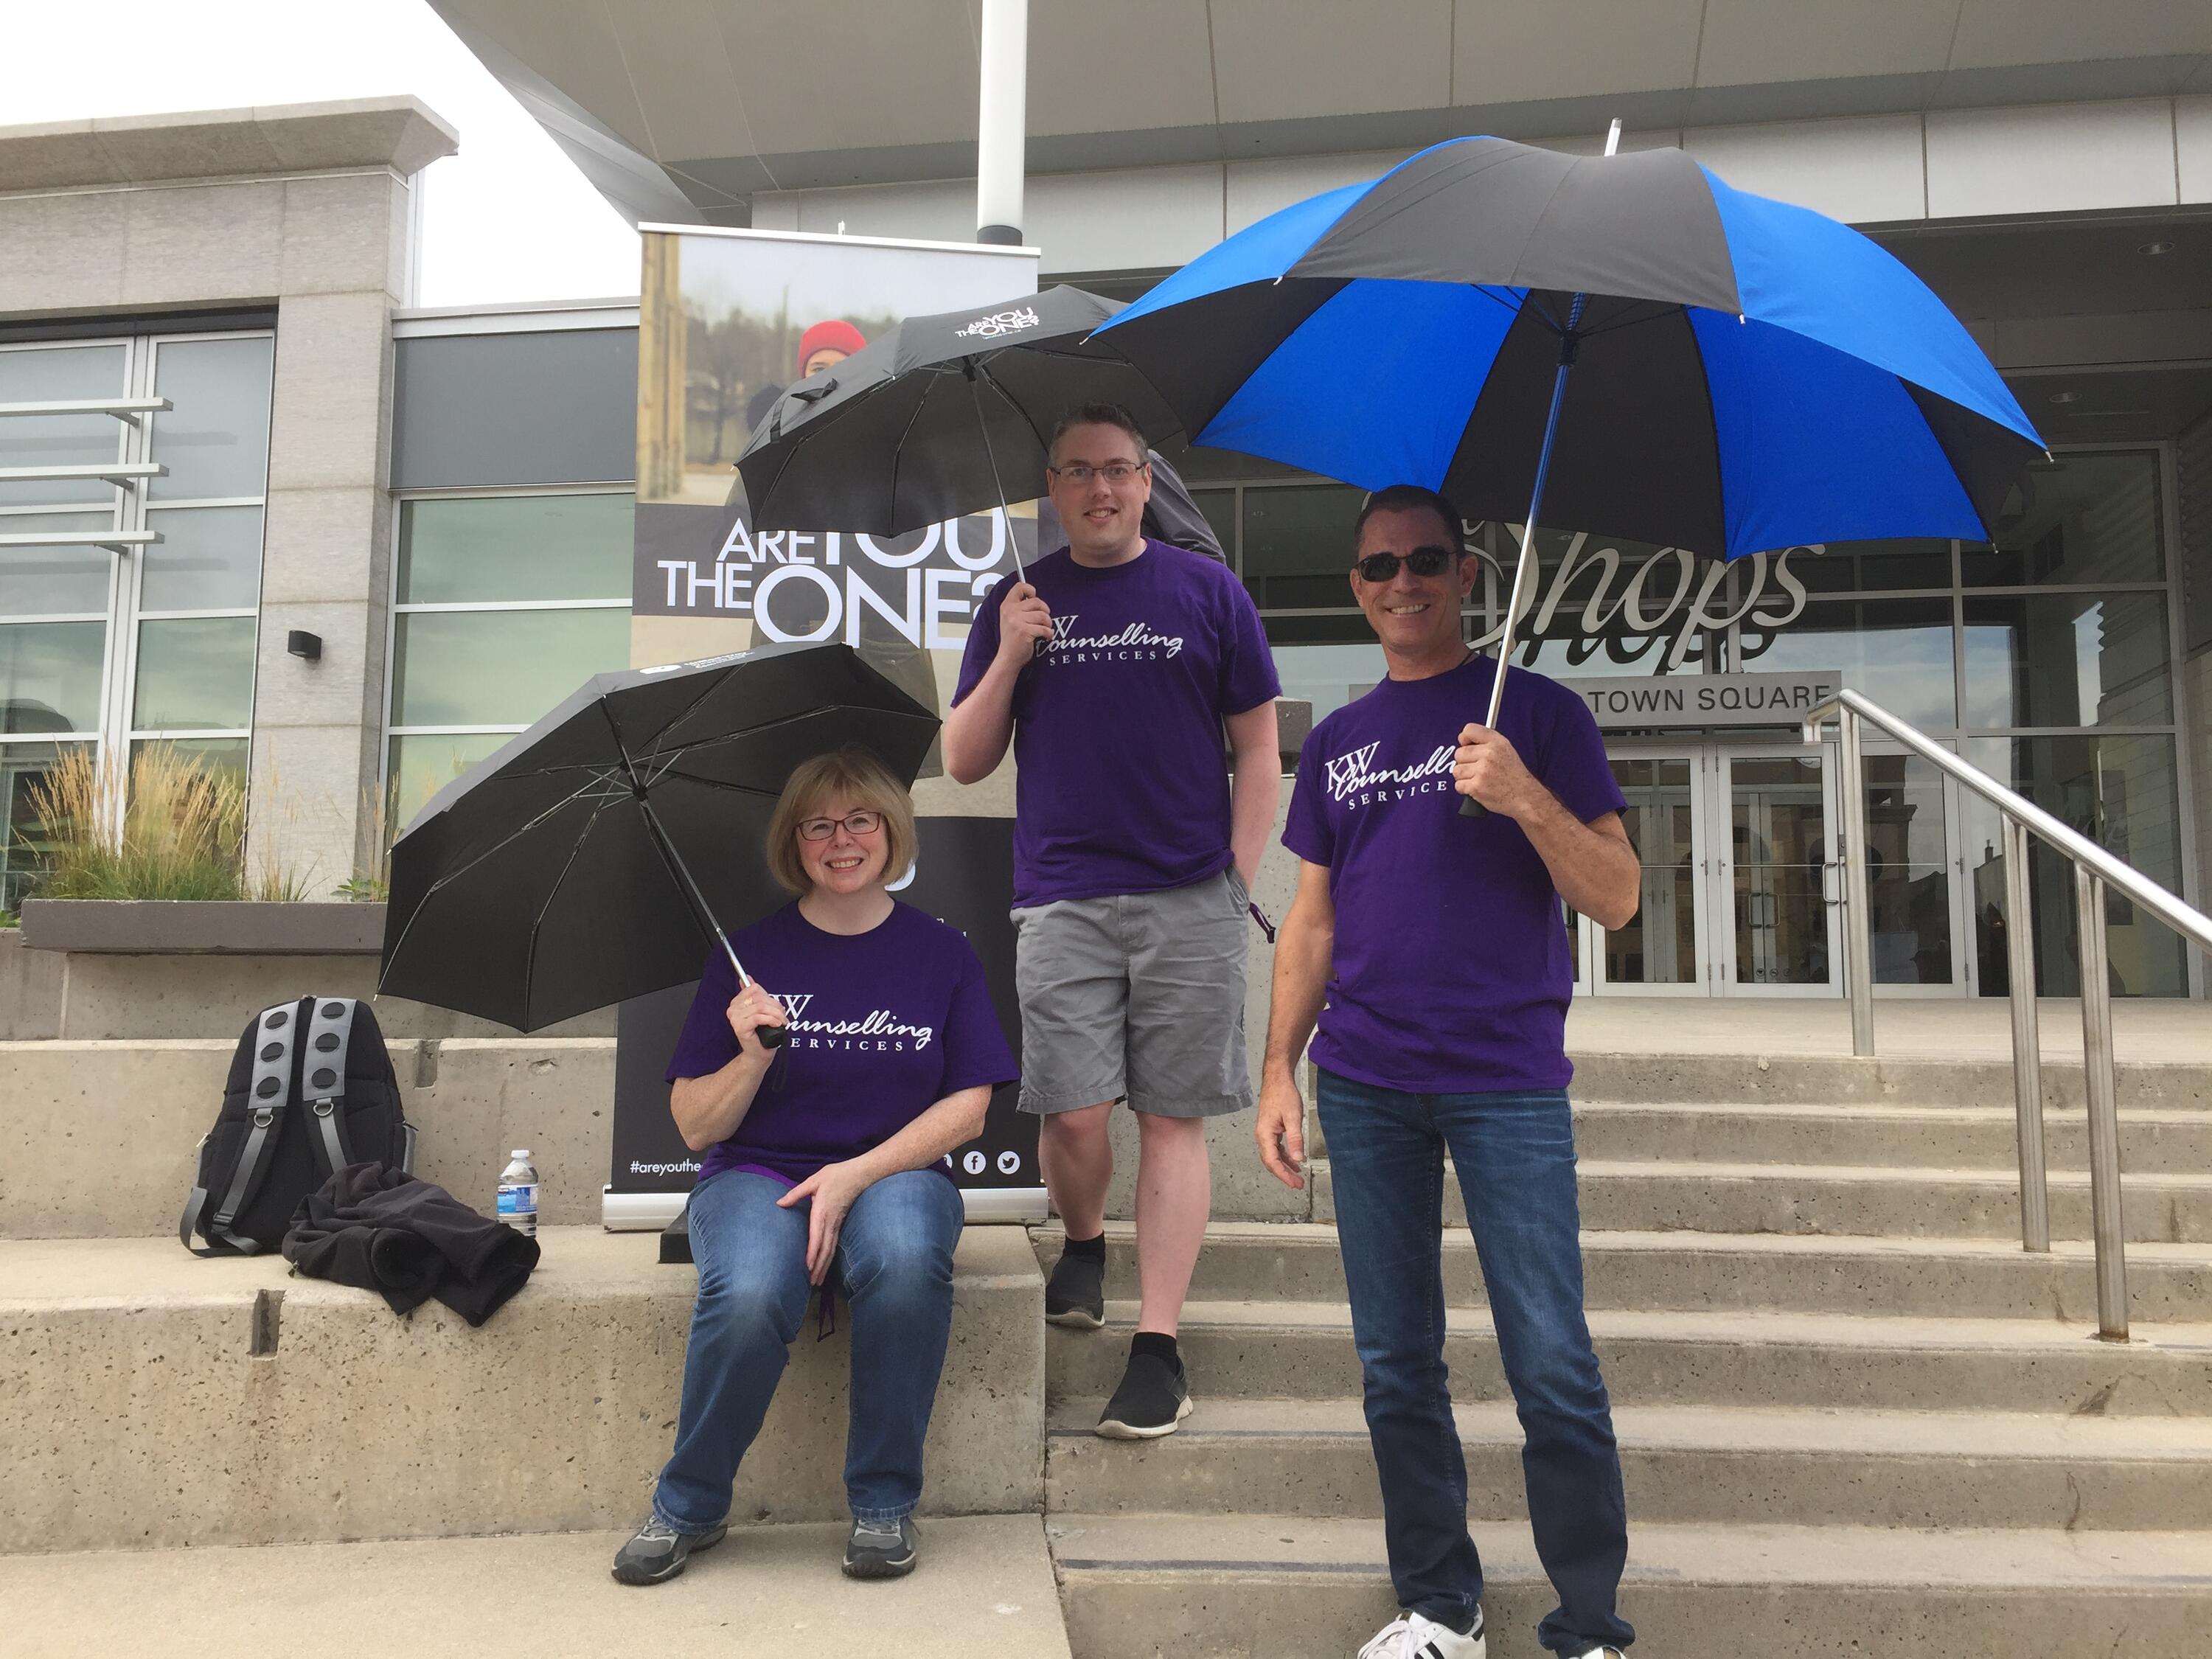 KW Counselling's United Way Umbrella March